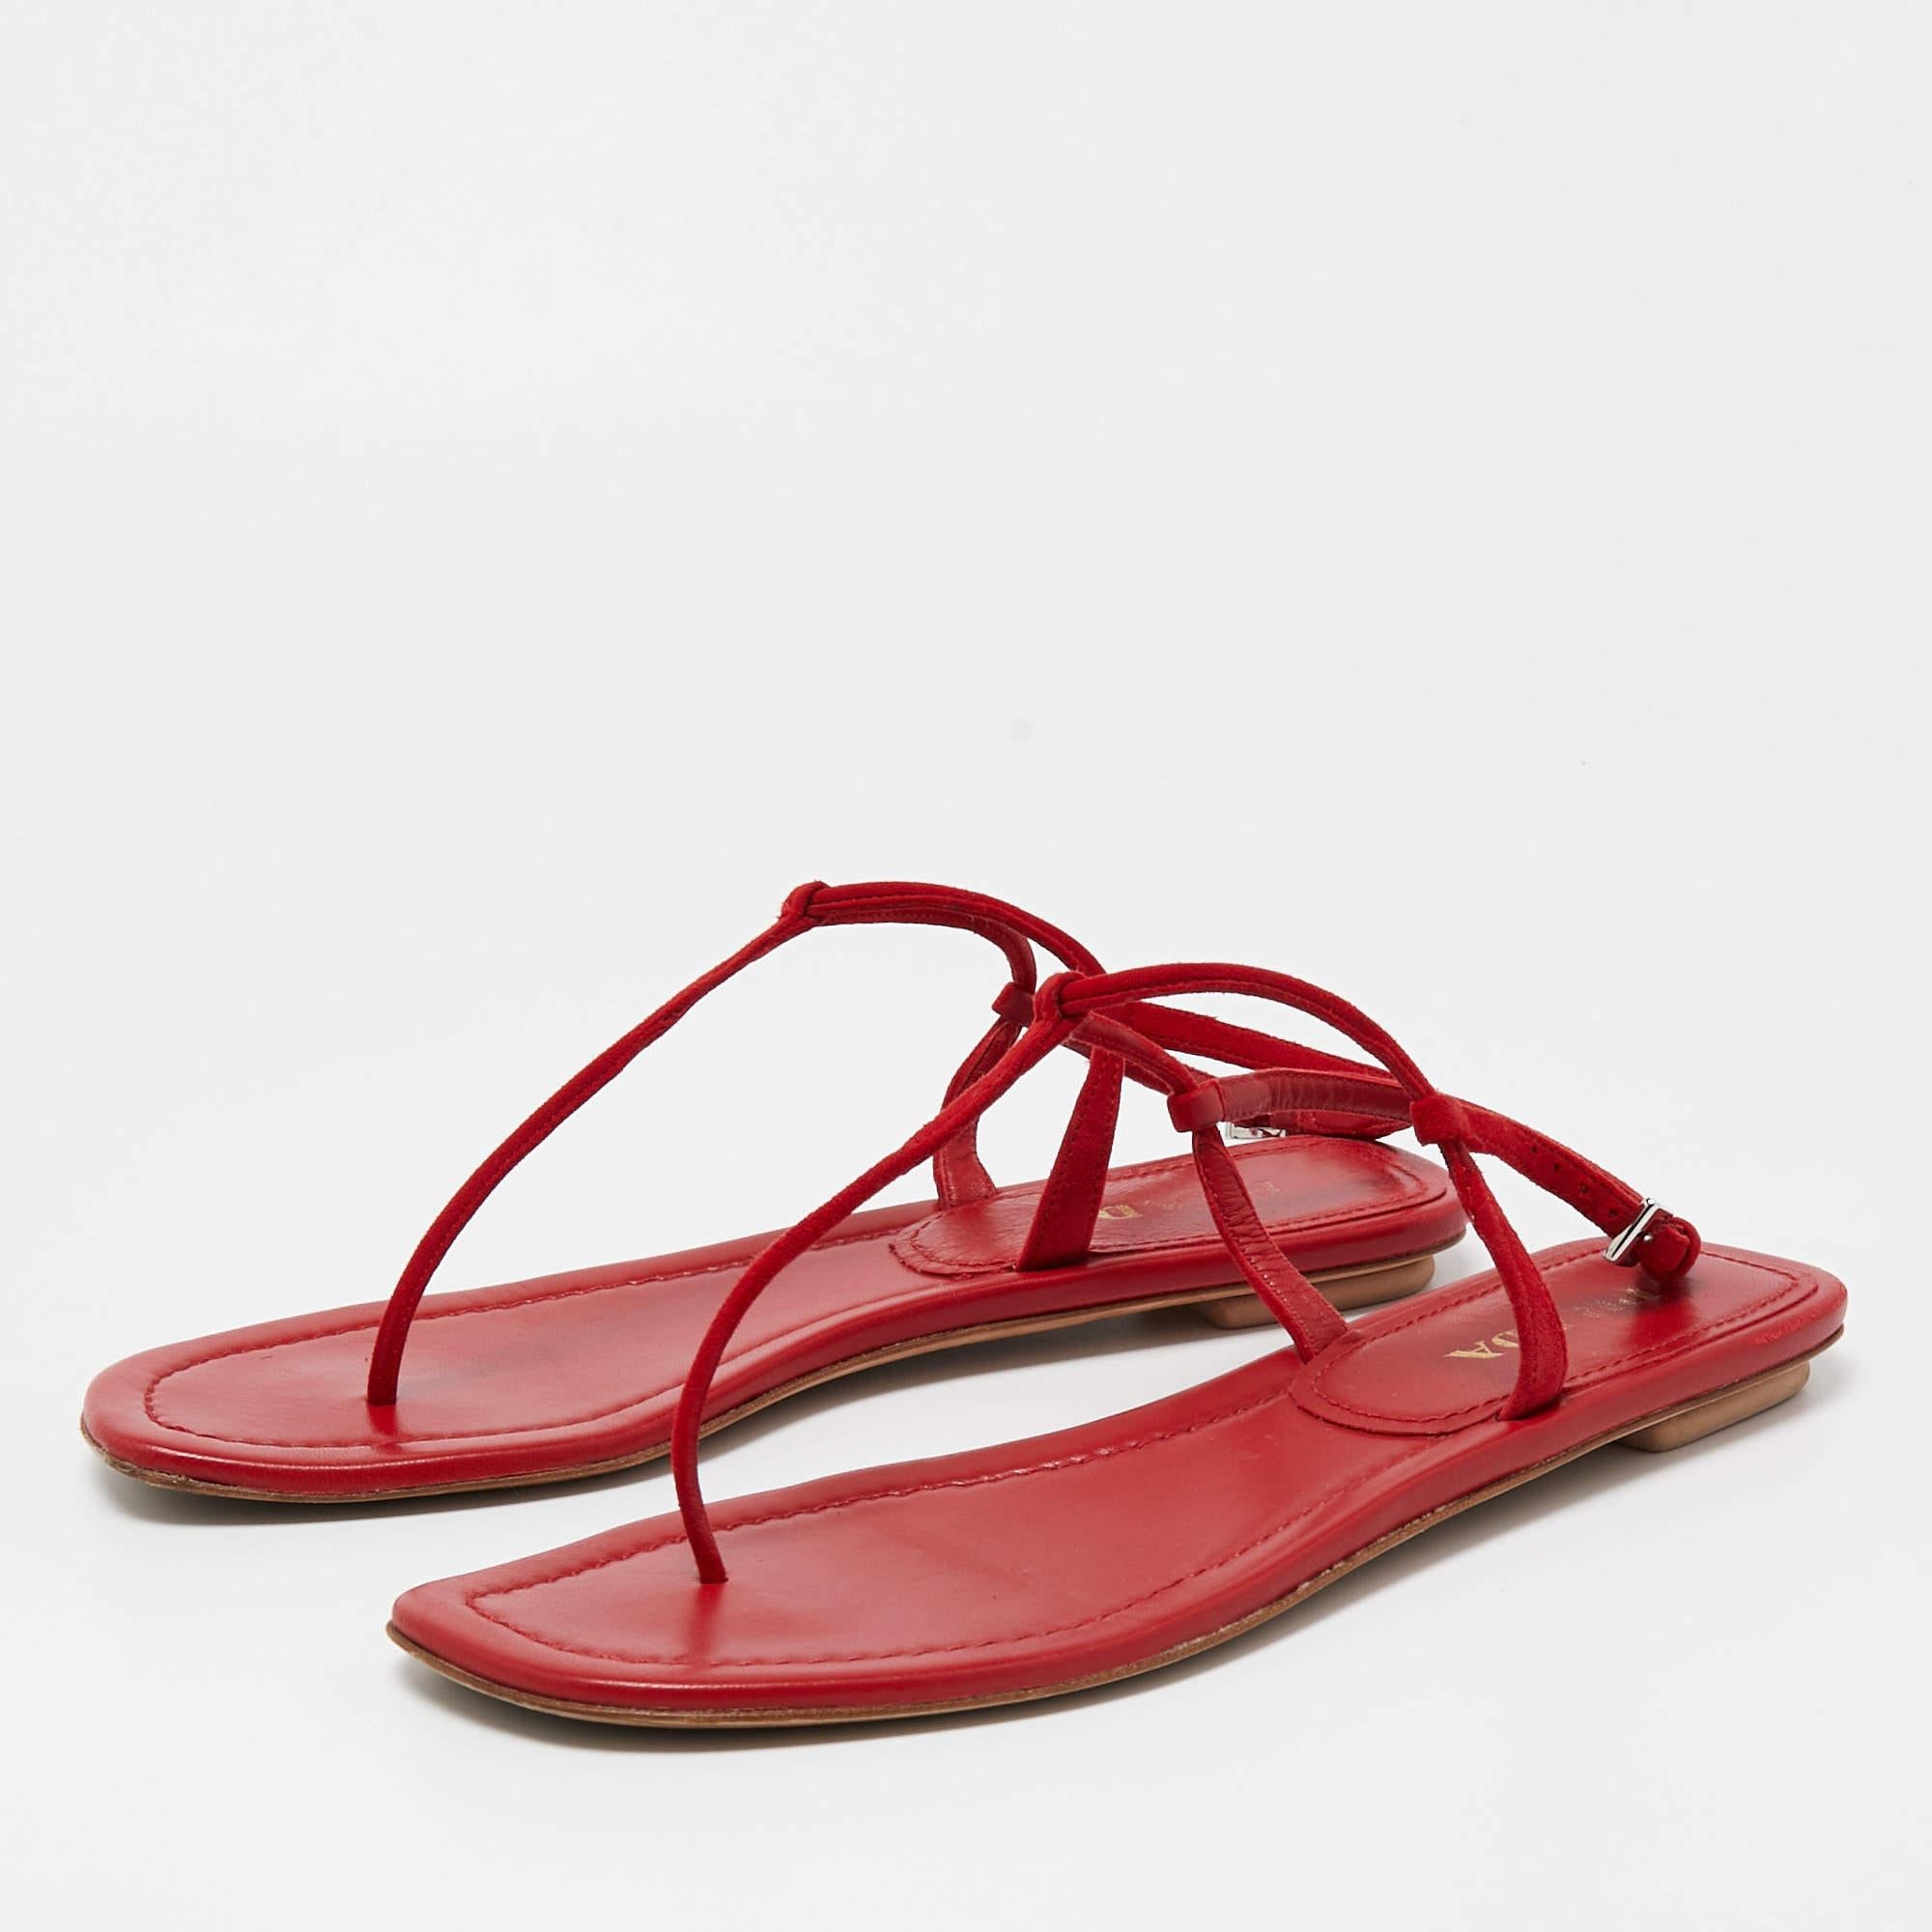 Women's Prada Red Suede Thong Flat Sandals Size 39.5